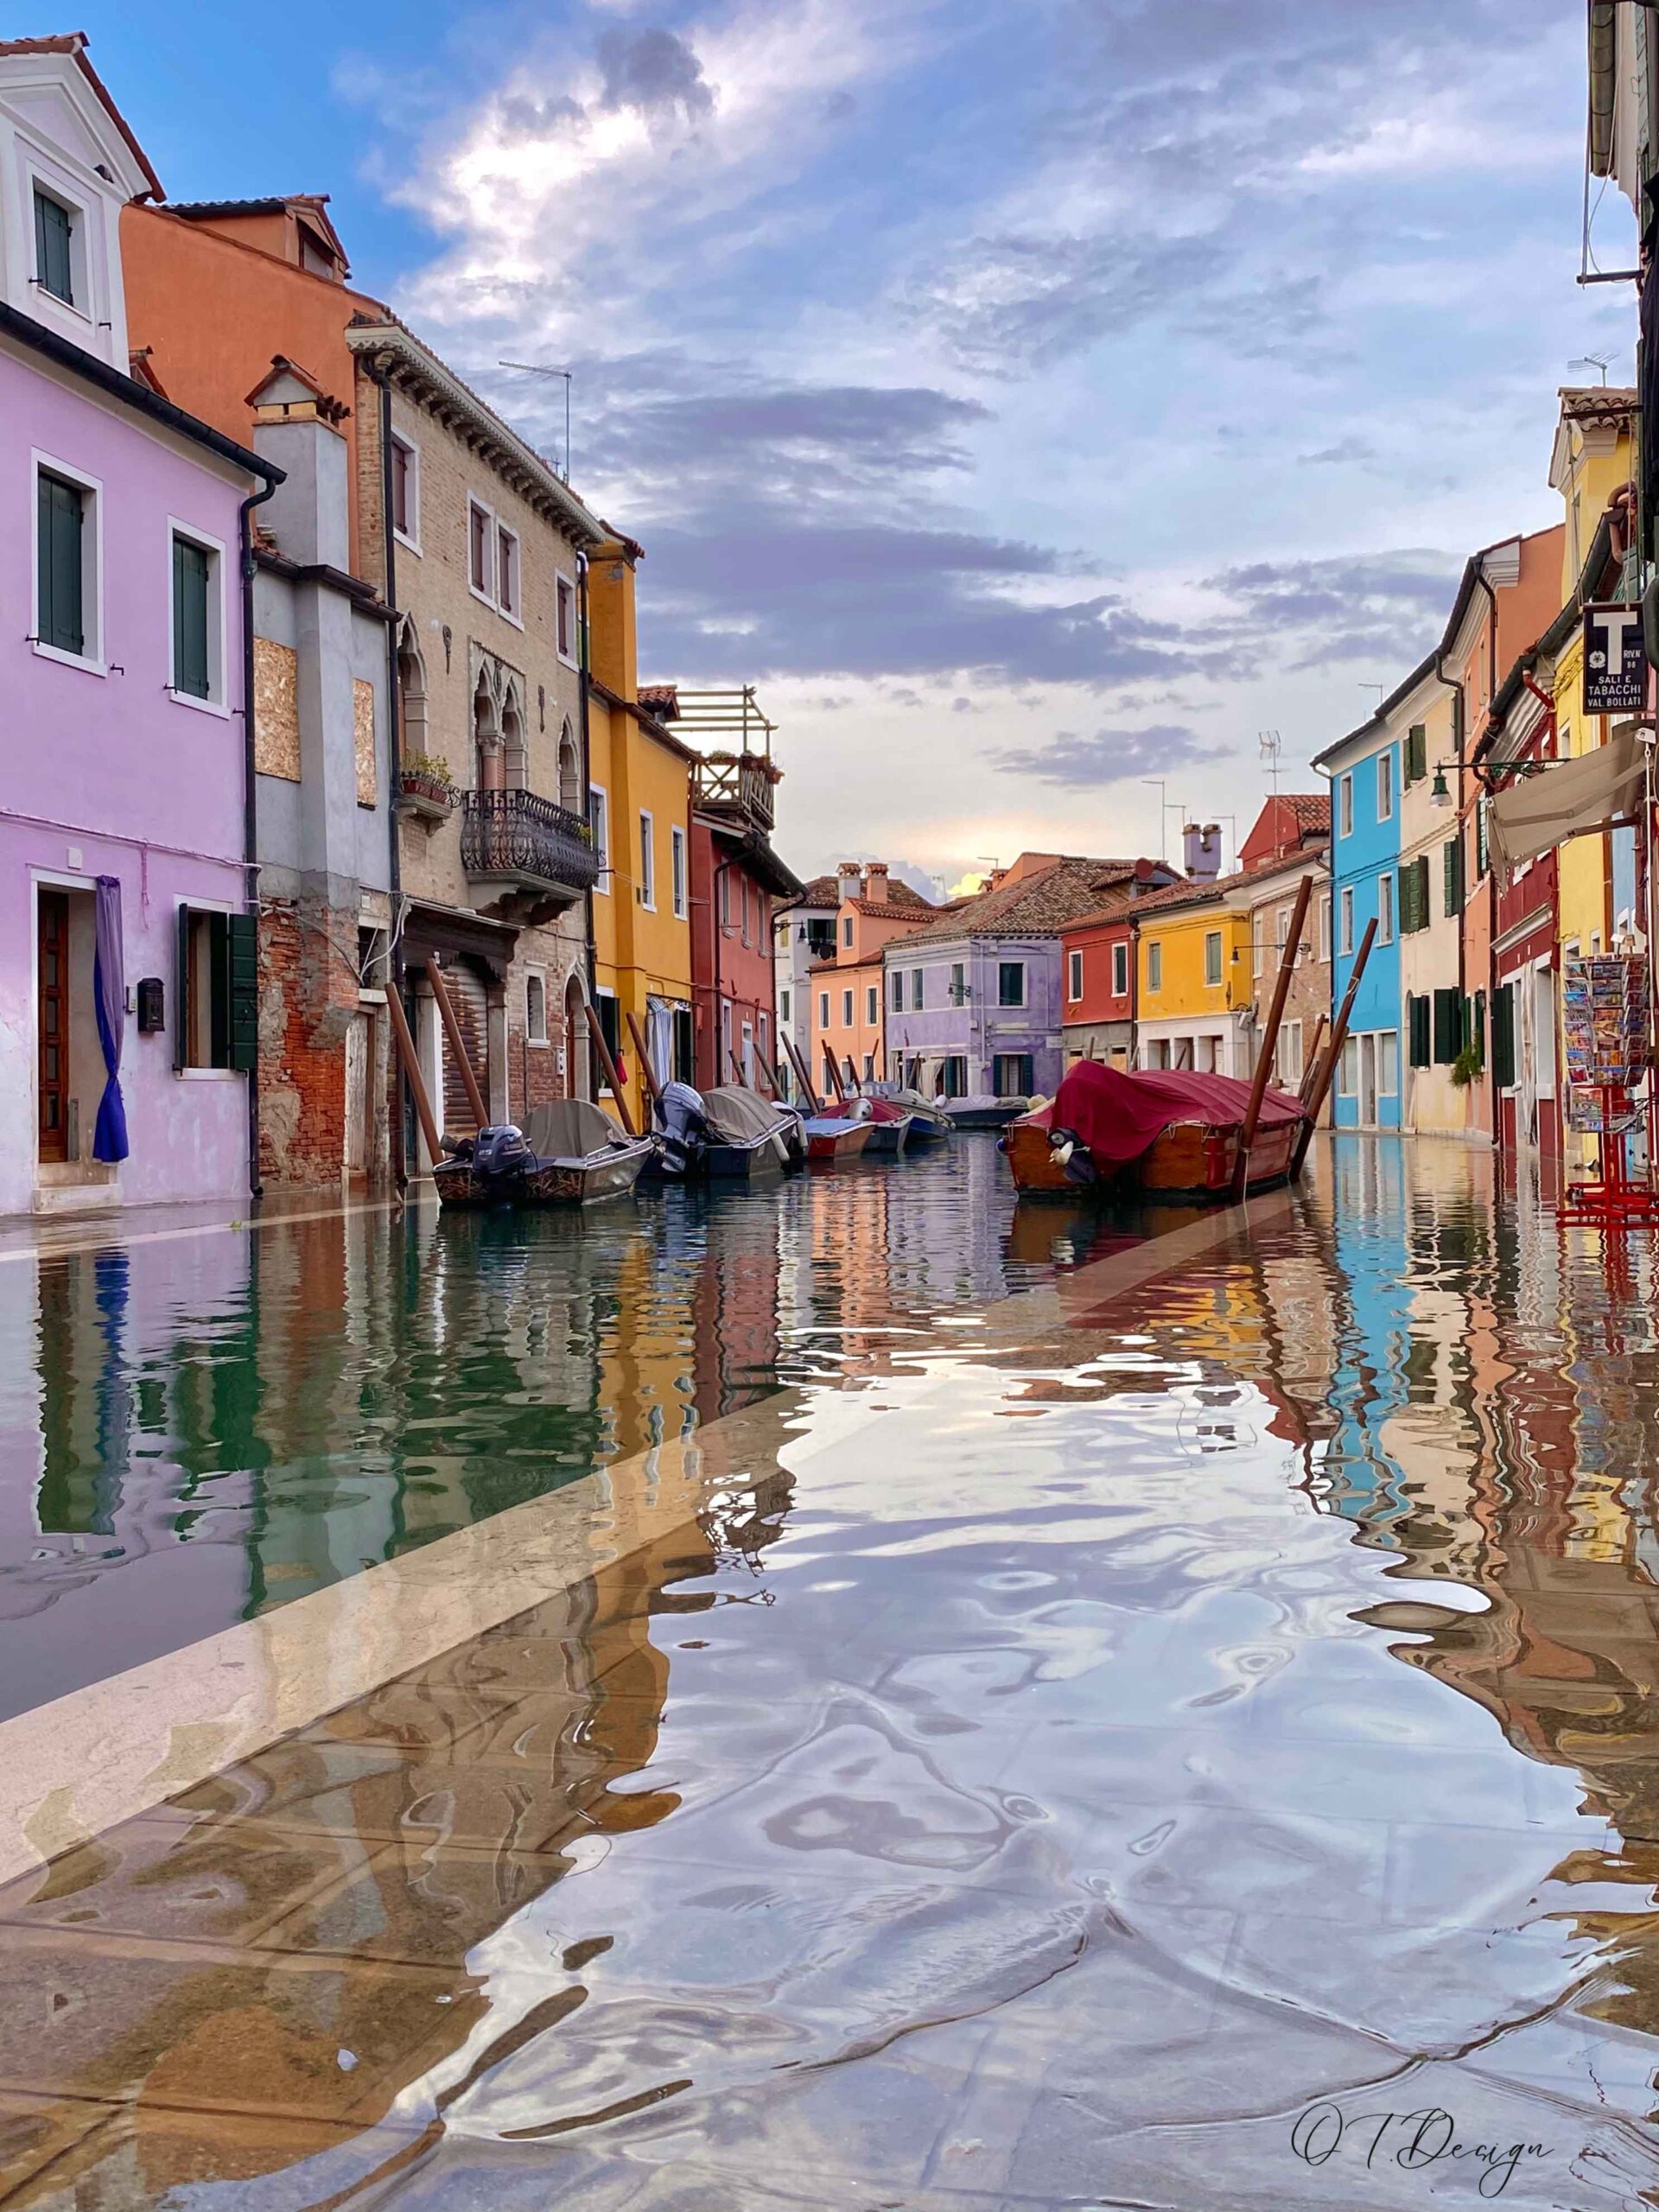 Reflections in the water in time of "Acqua Alta" in the colorful island  of Burano, Italy